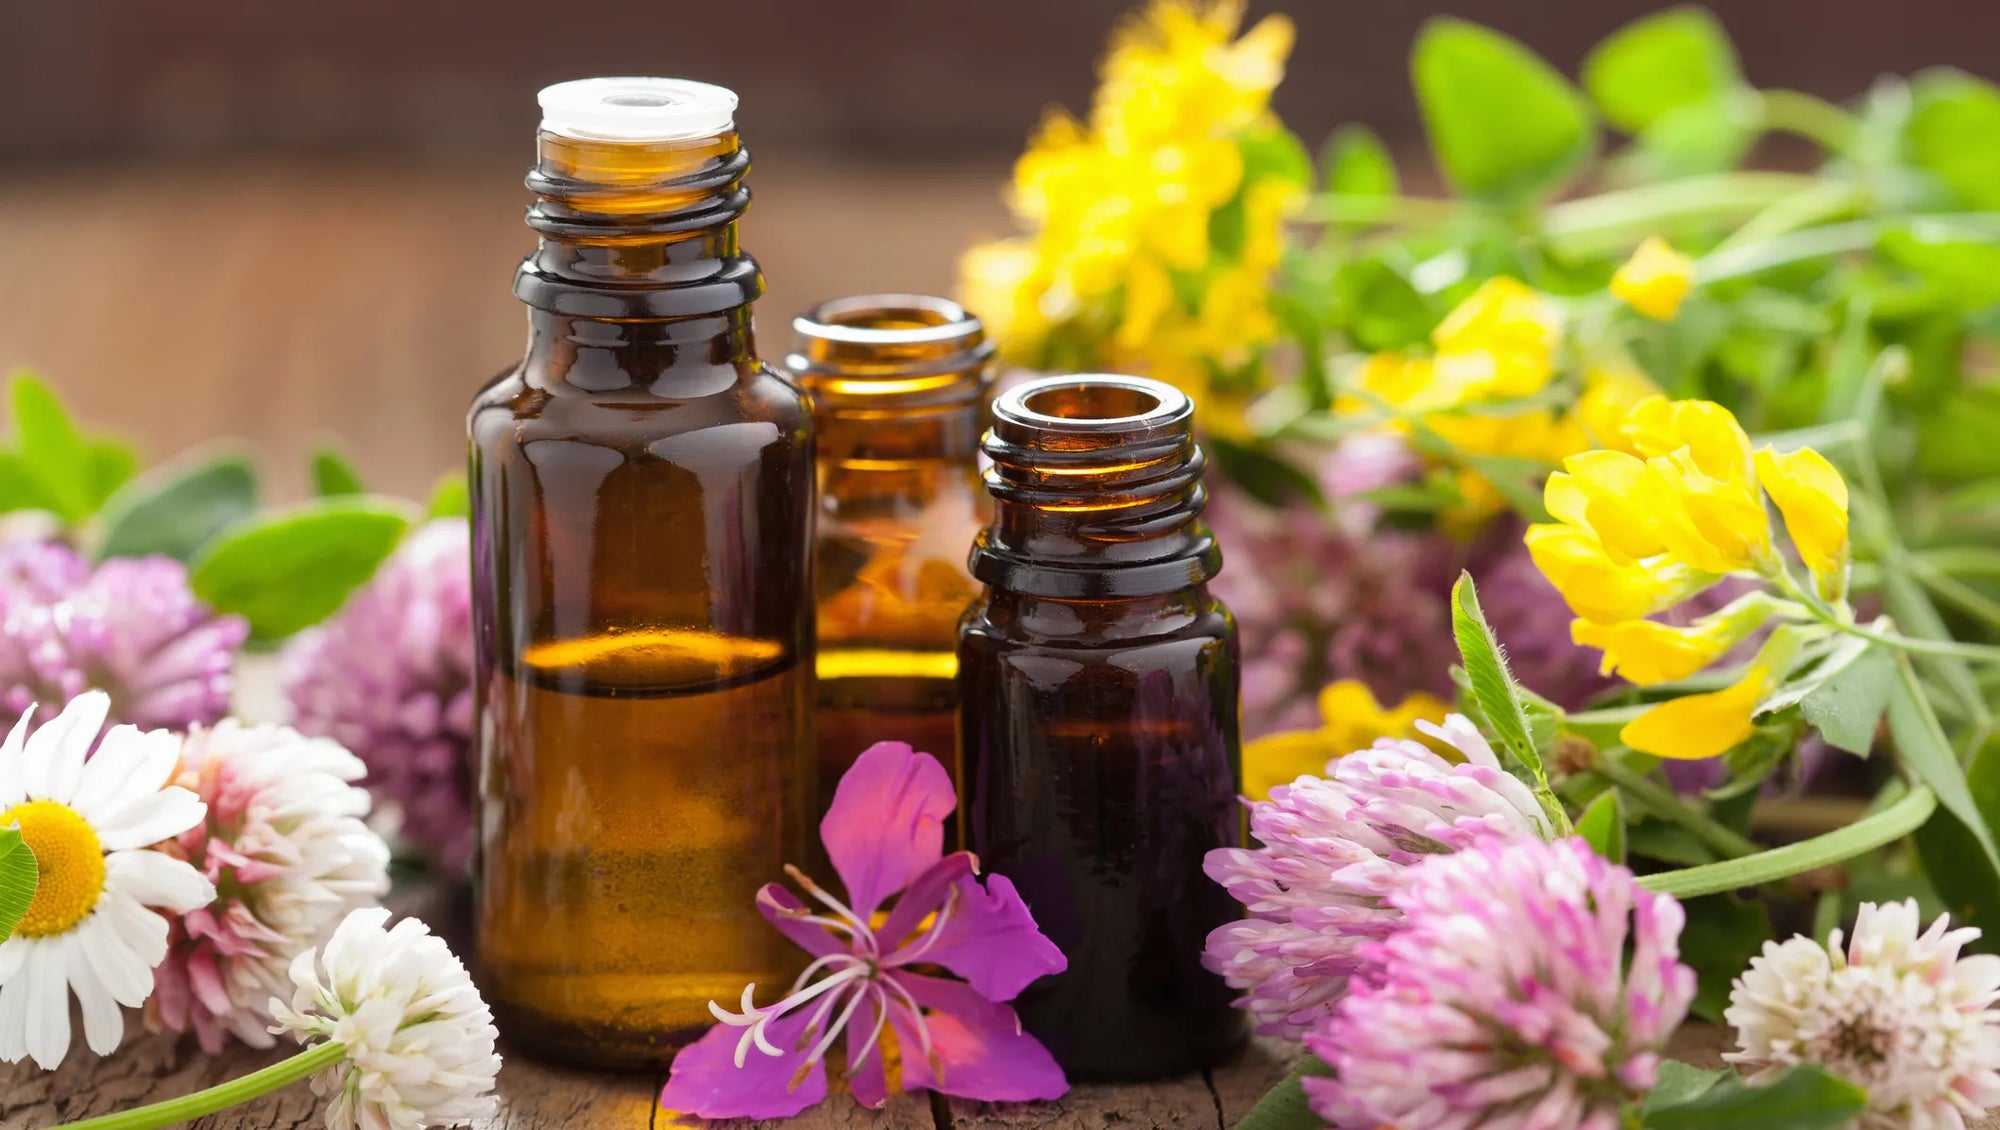 Transform Your Health and Well-being with Aromatherapy: 12 Ways Essential Oils Can Make a Difference